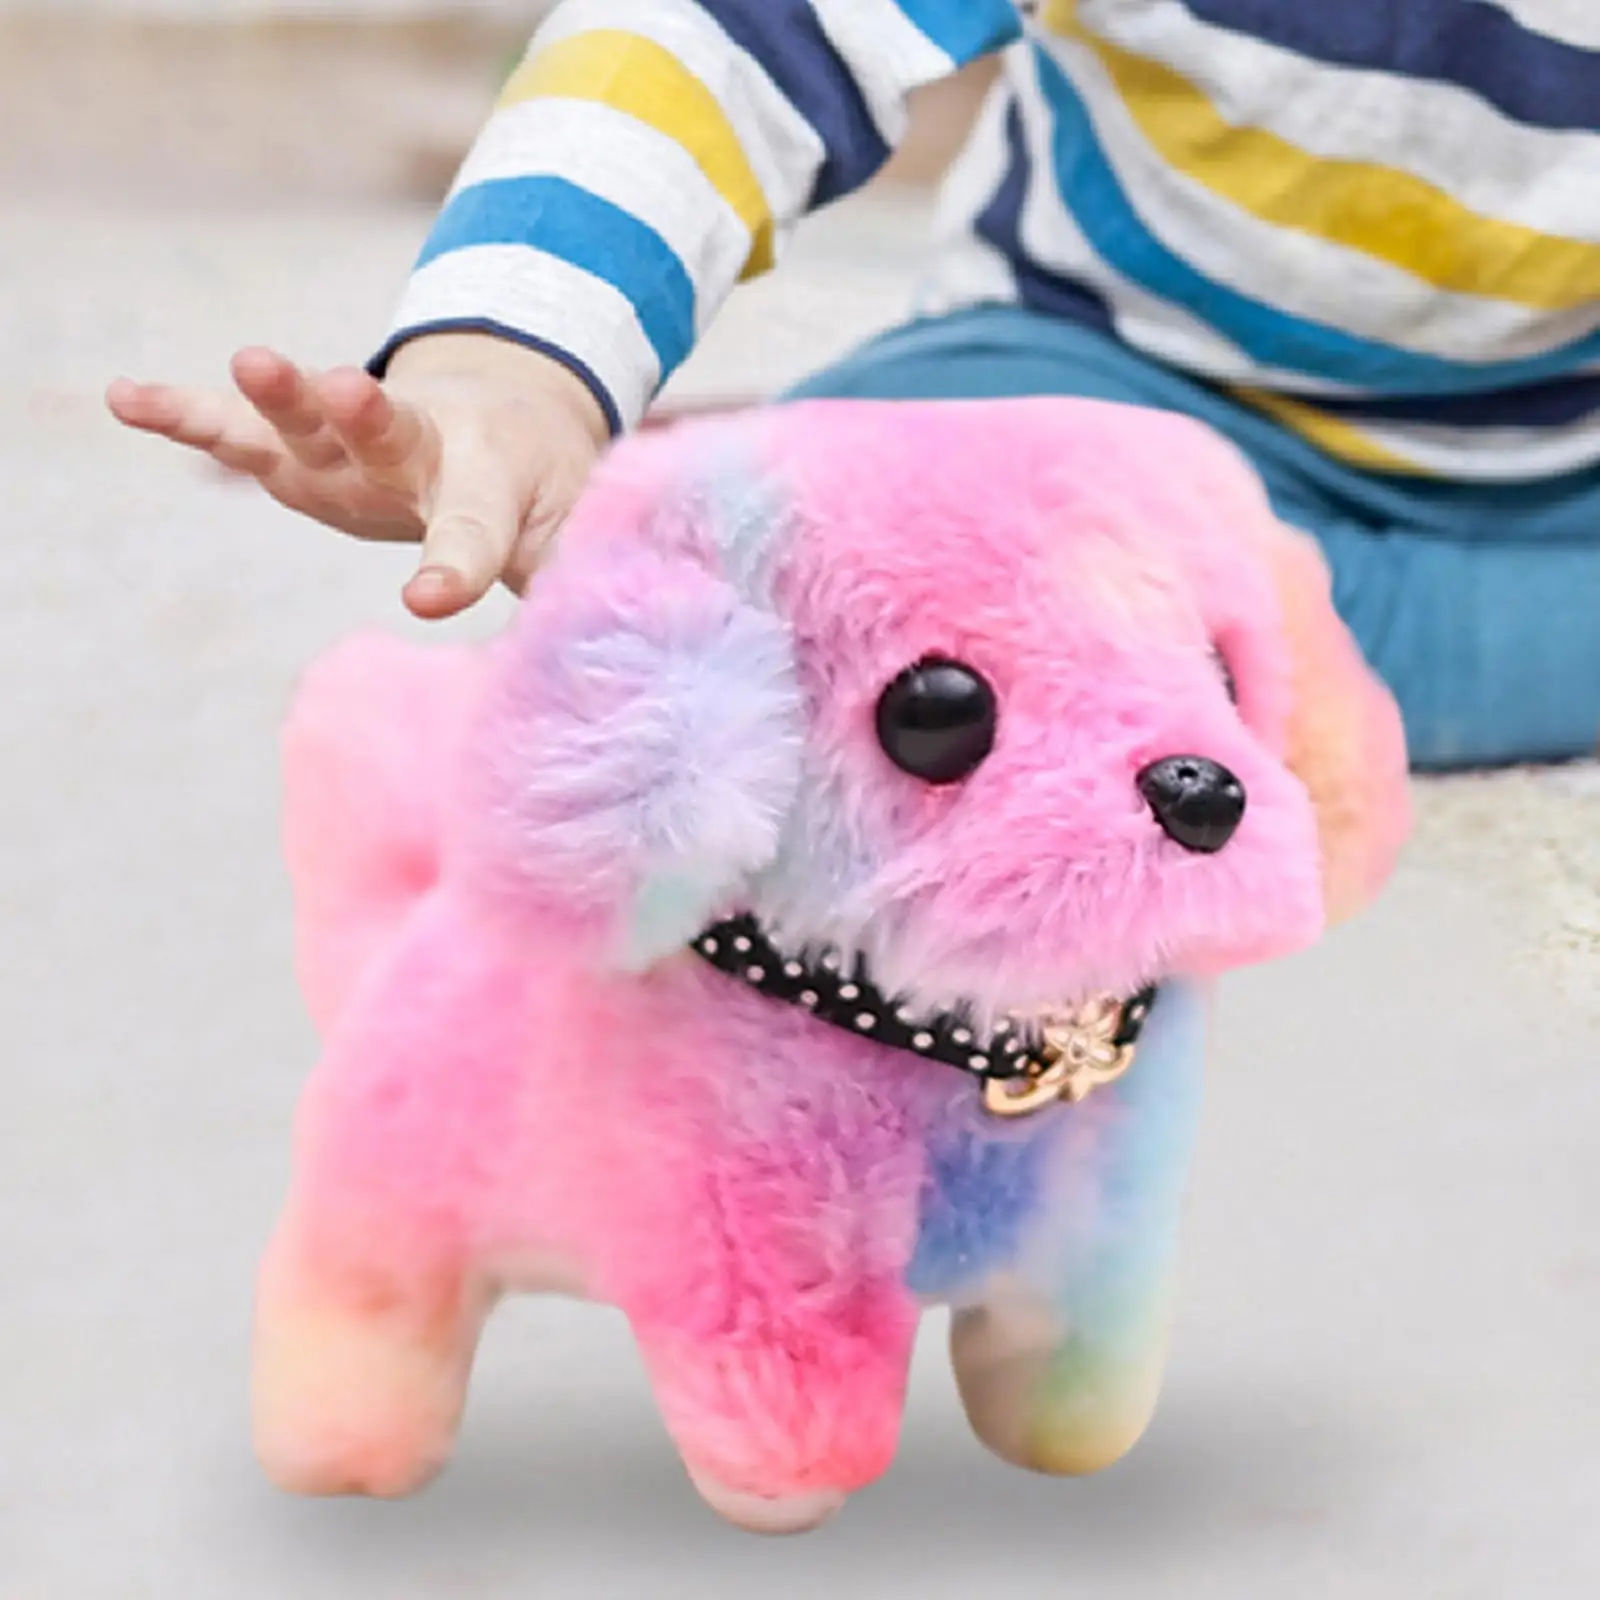 Electronic Pet Plush Toy Doll for Xmas Present New Year Gifts Bedtime Friend